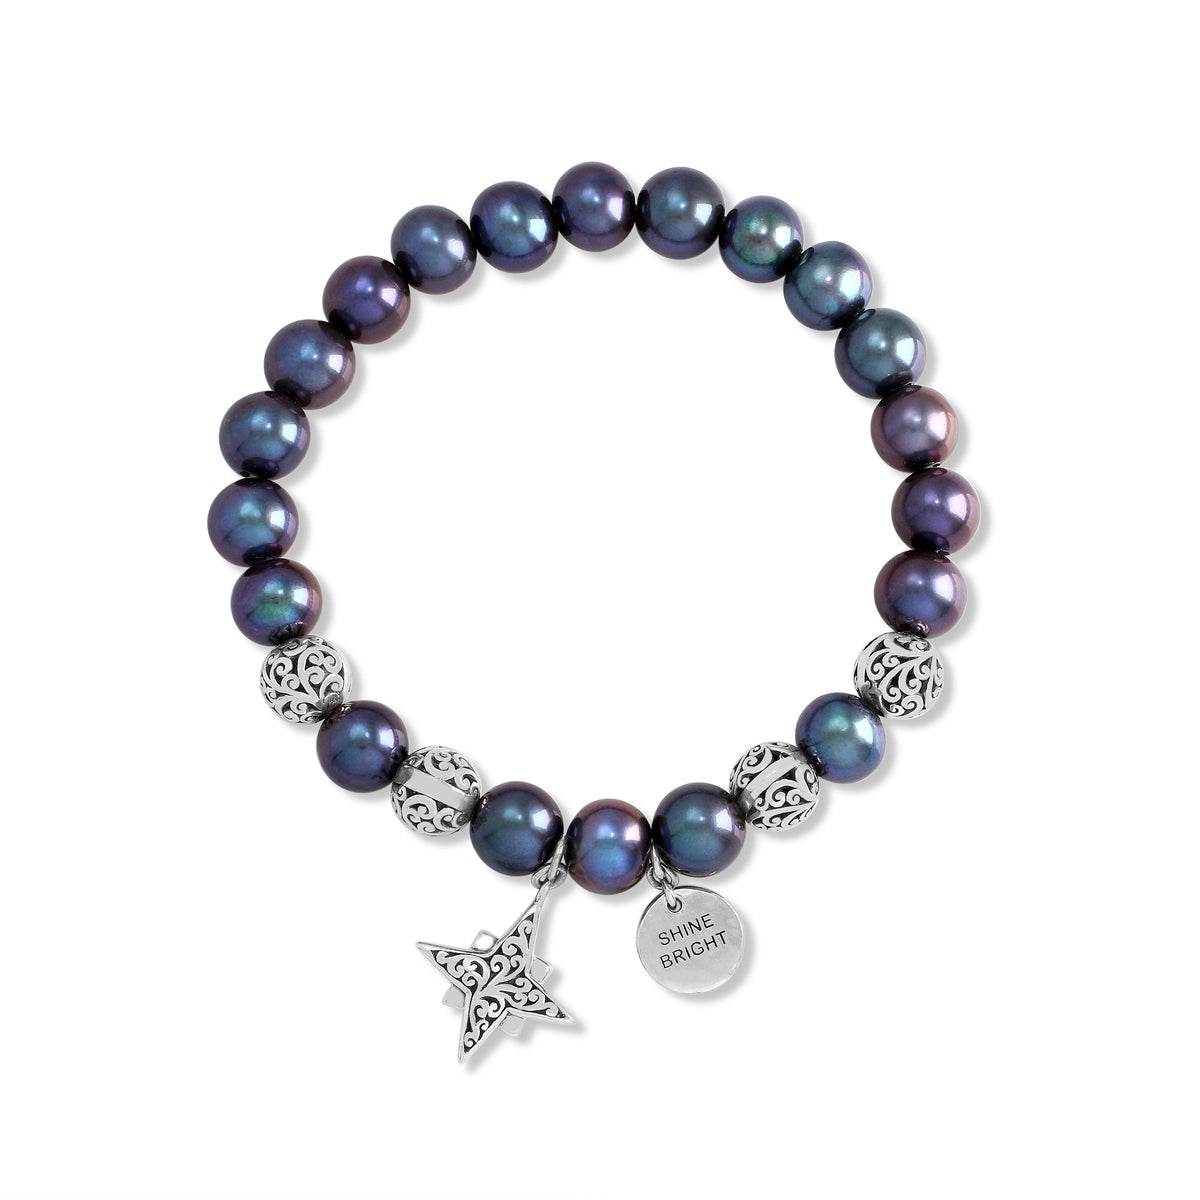 Peacock Pearl Beads (8mm) and LH Scroll Beads with Starbright & "Shine Bright" Charm Stretch Bracelet